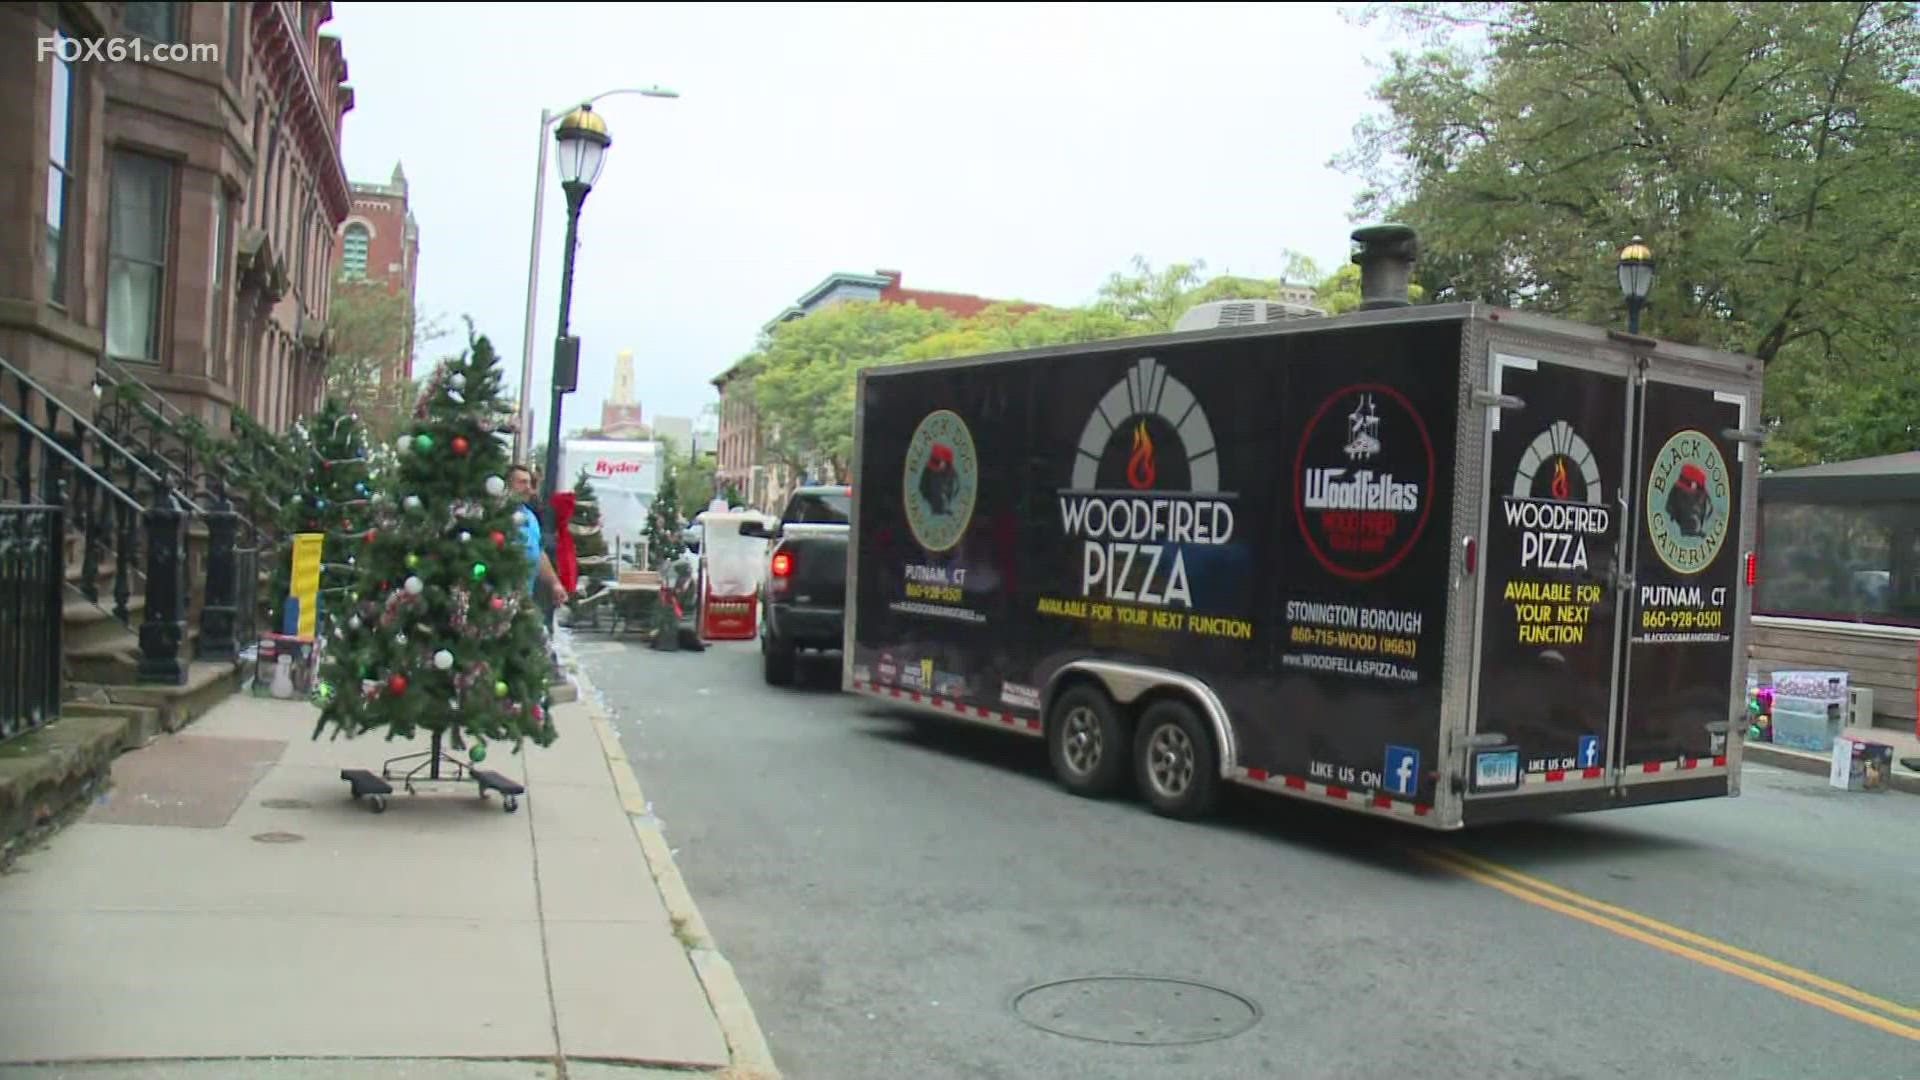 The film "Christmas in Harlem" gave Capitol Ave. in Hartford a taste of the holiday spirit in September.